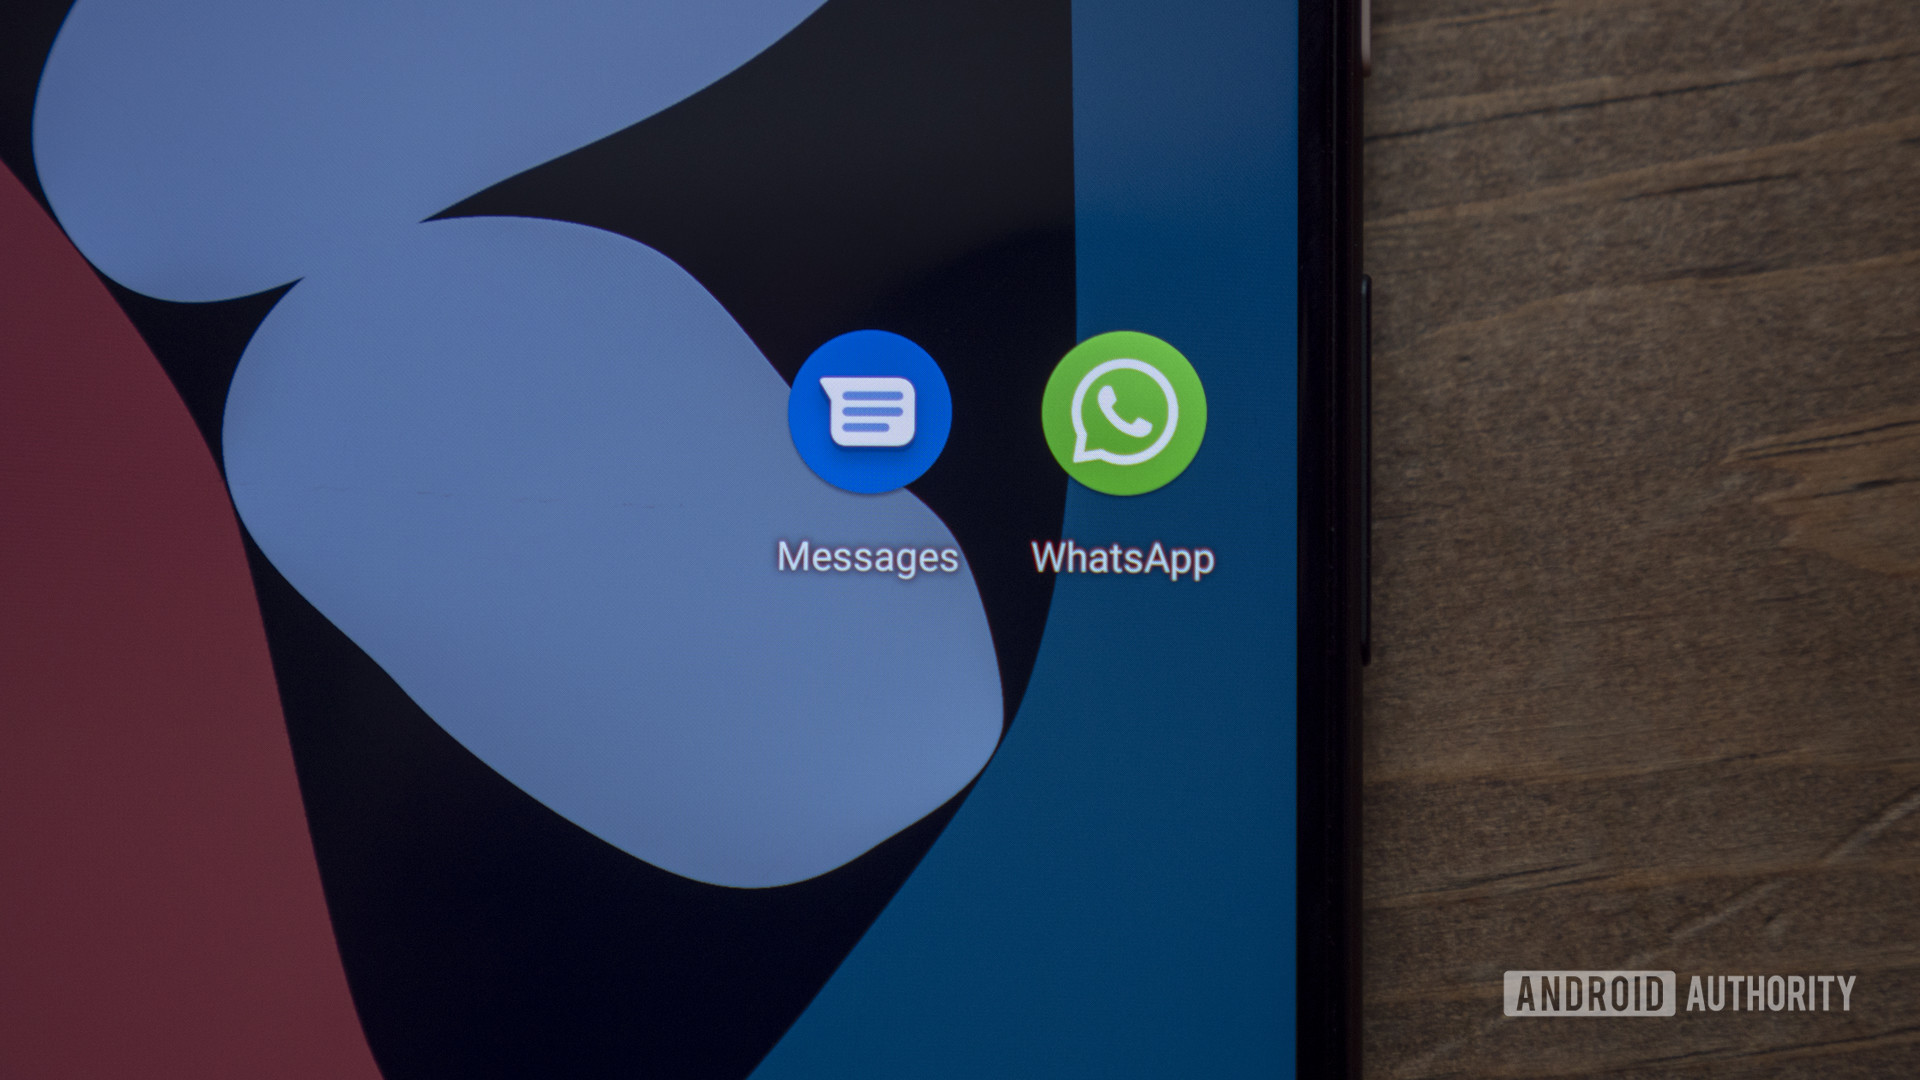 google messages with rcs whatsapp icons google pixel 4 xl 4